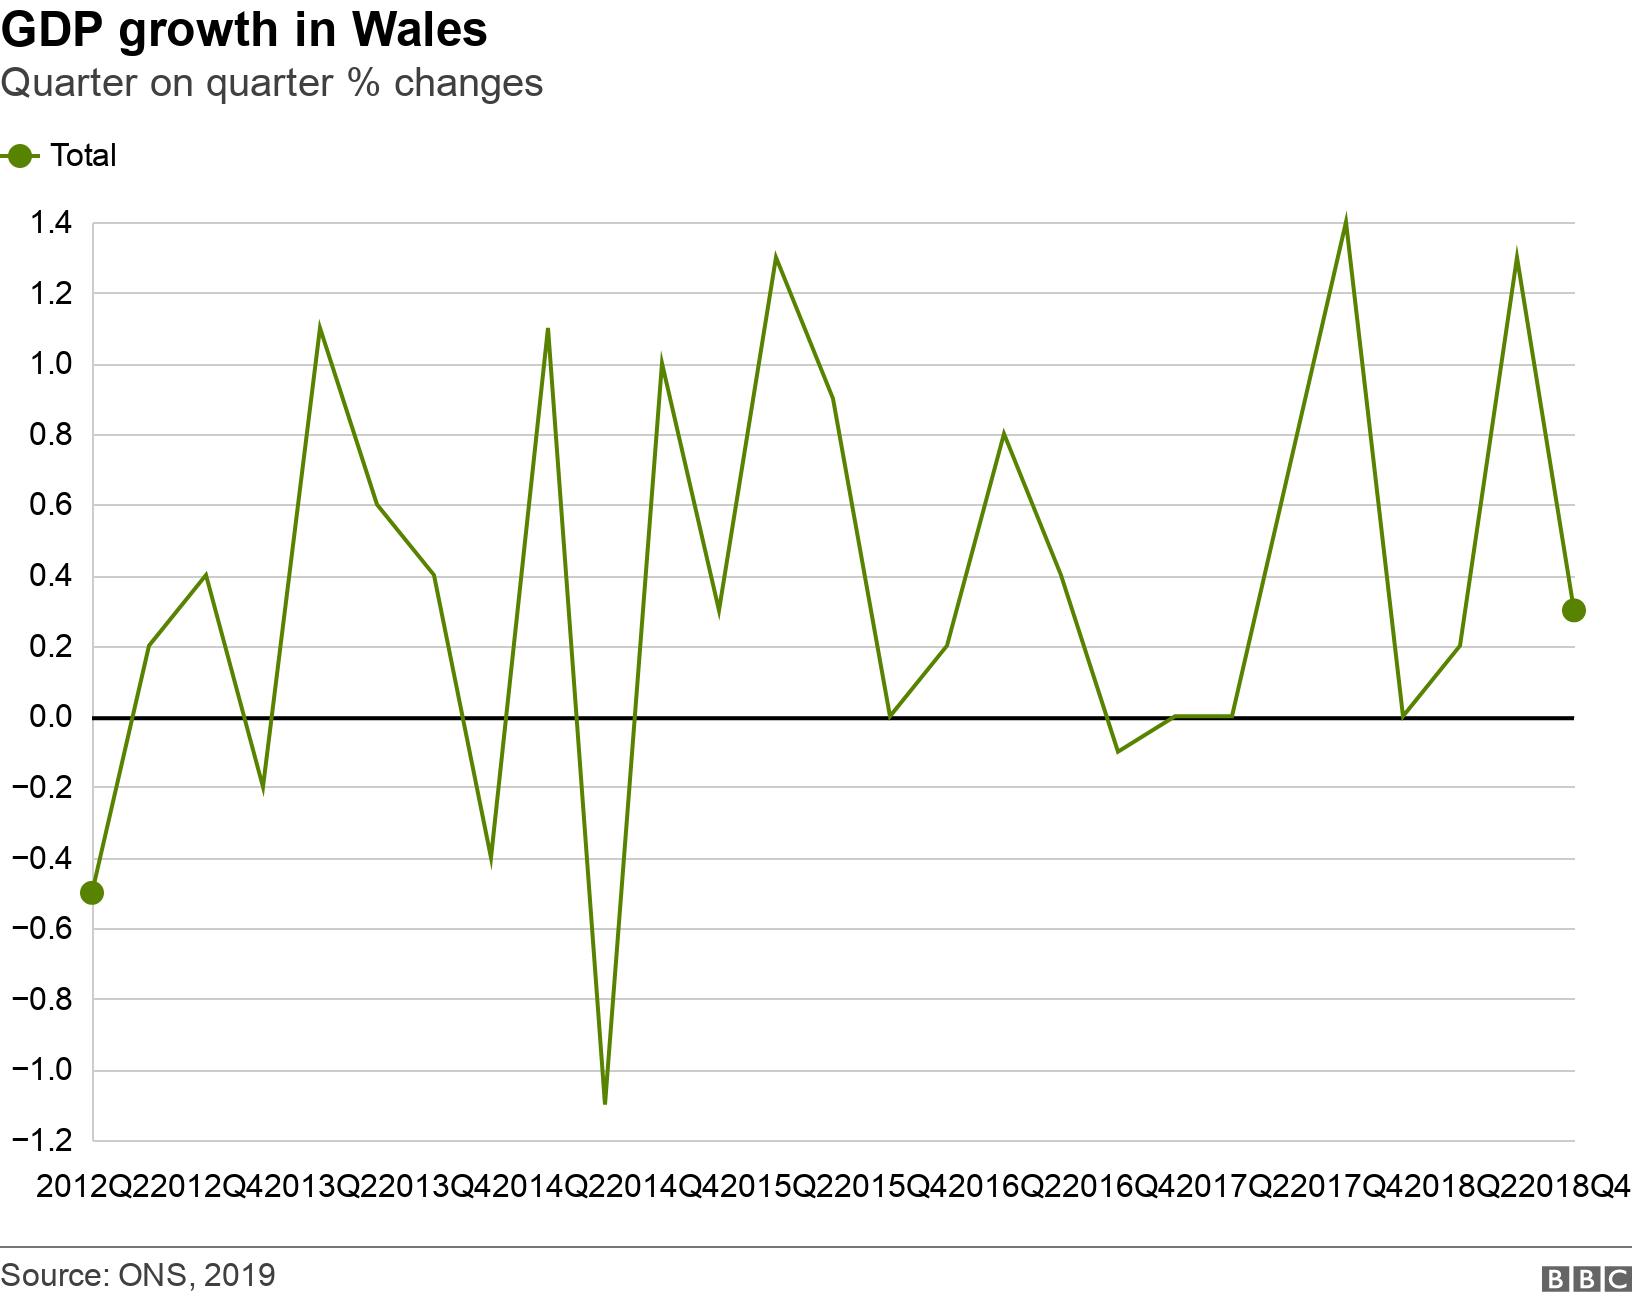 GDP growth in Wales. Quarter on quarter % changes. .